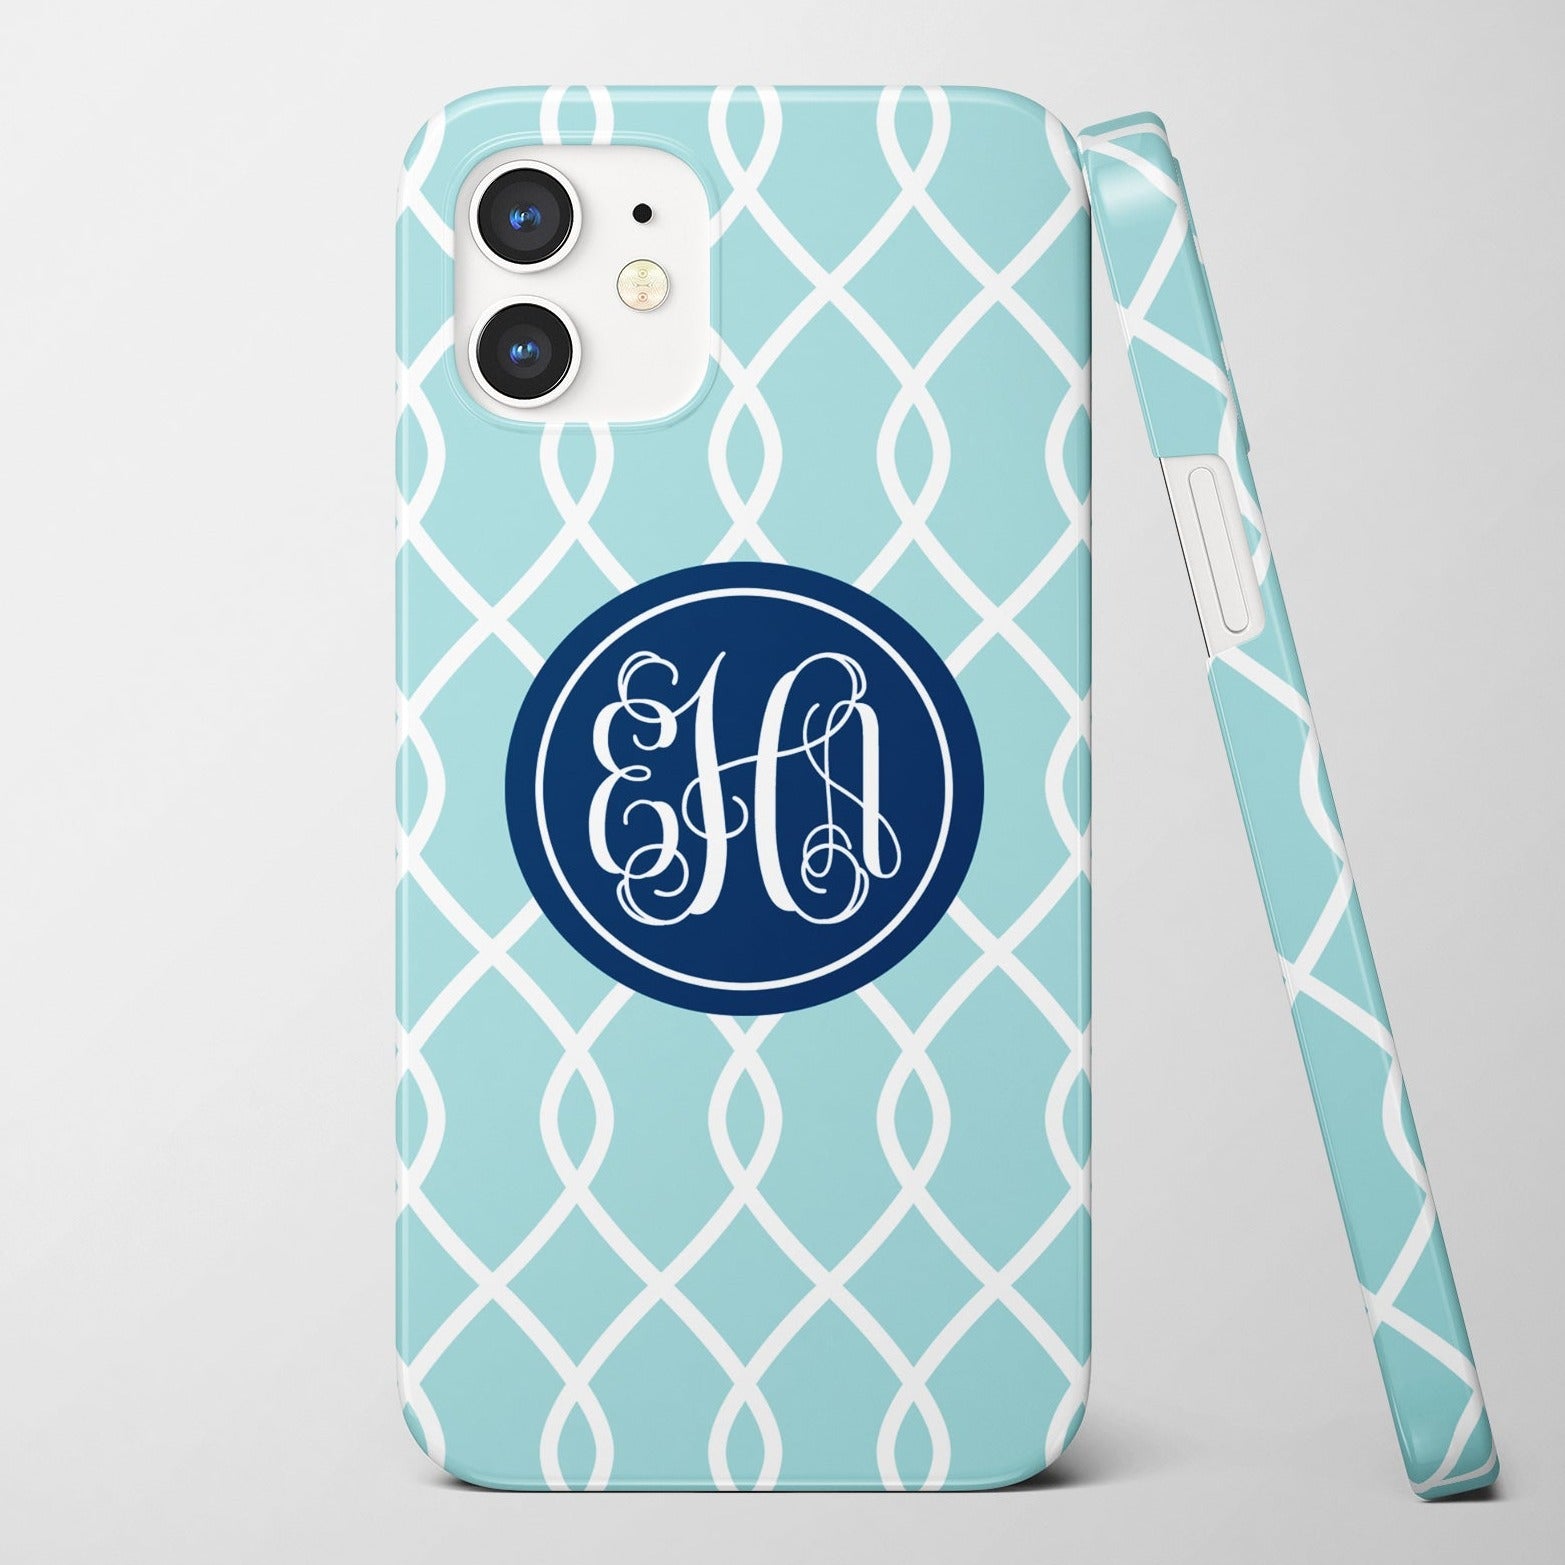 Monogrammed iPhone case with  chain link pattern, colors can be customized